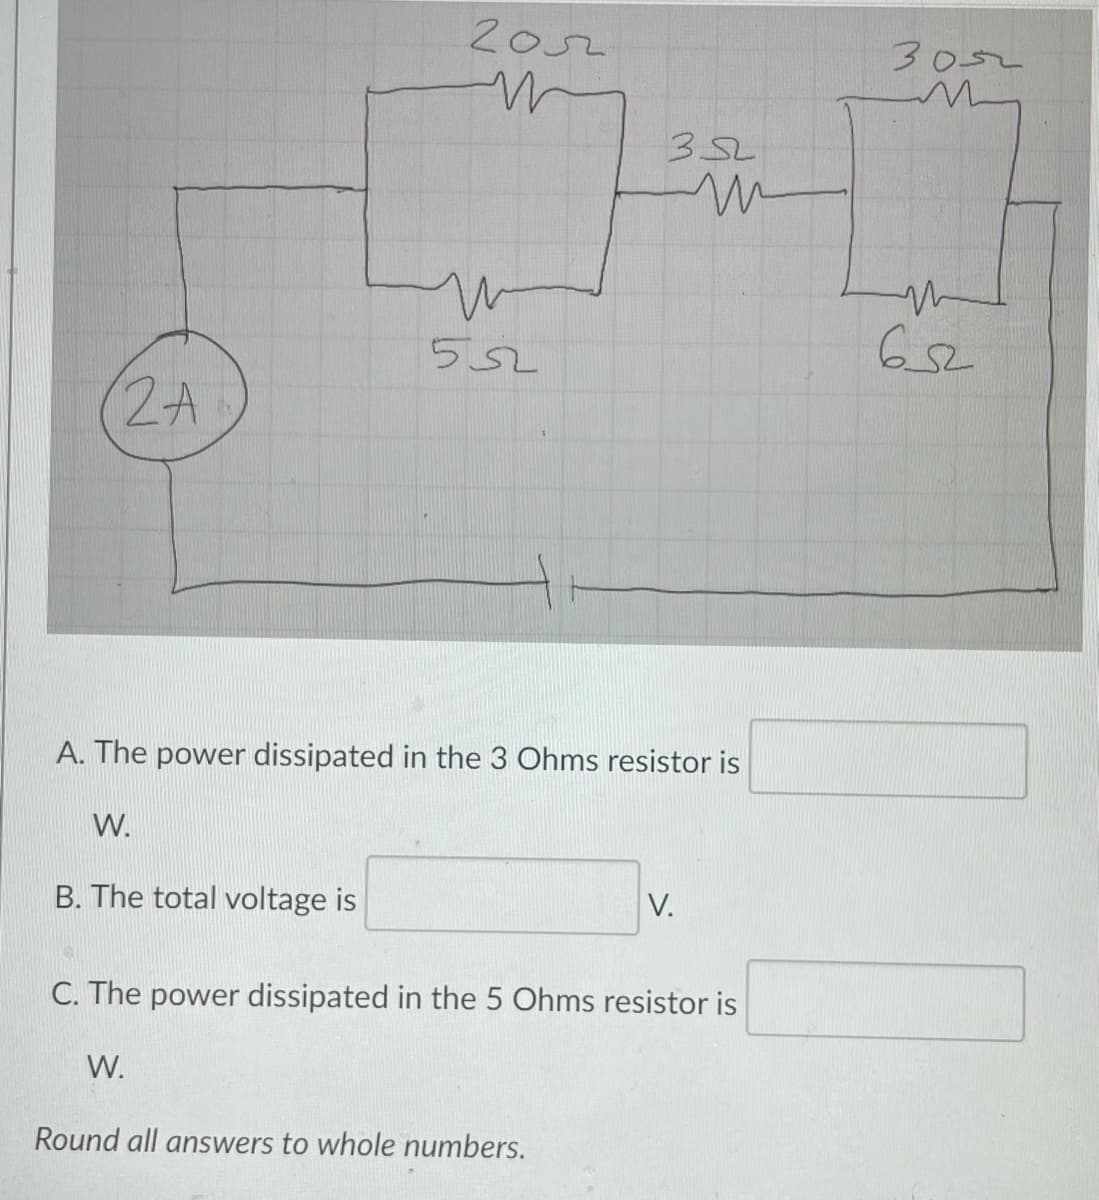 2o2
3052
352
552
652
2A
A. The power dissipated in the 3 Ohms resistor is
W.
B. The total voltage is
V.
C. The power dissipated in the 5 Ohms resistor is
W.
Round all answers to whole numbers.
